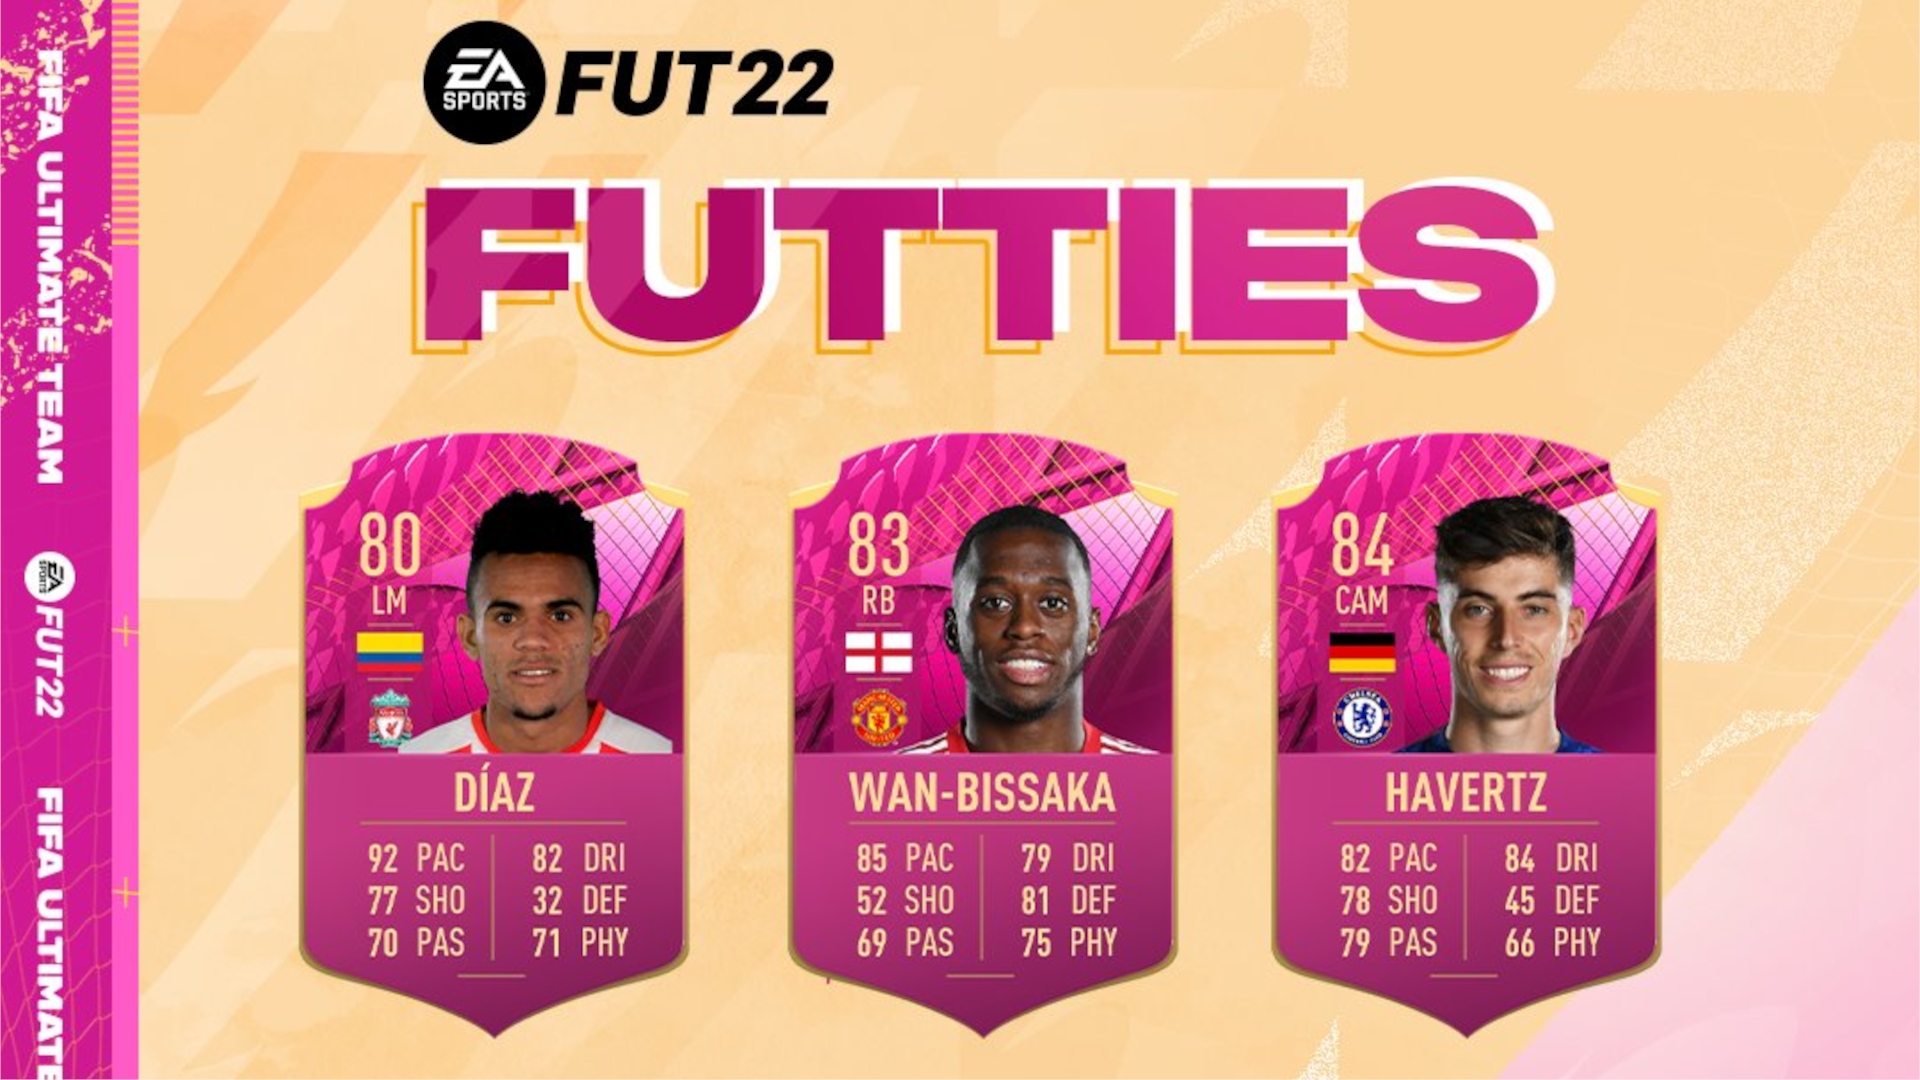 FIFA 22 FUTTIES promo What to expect, leaks, start date